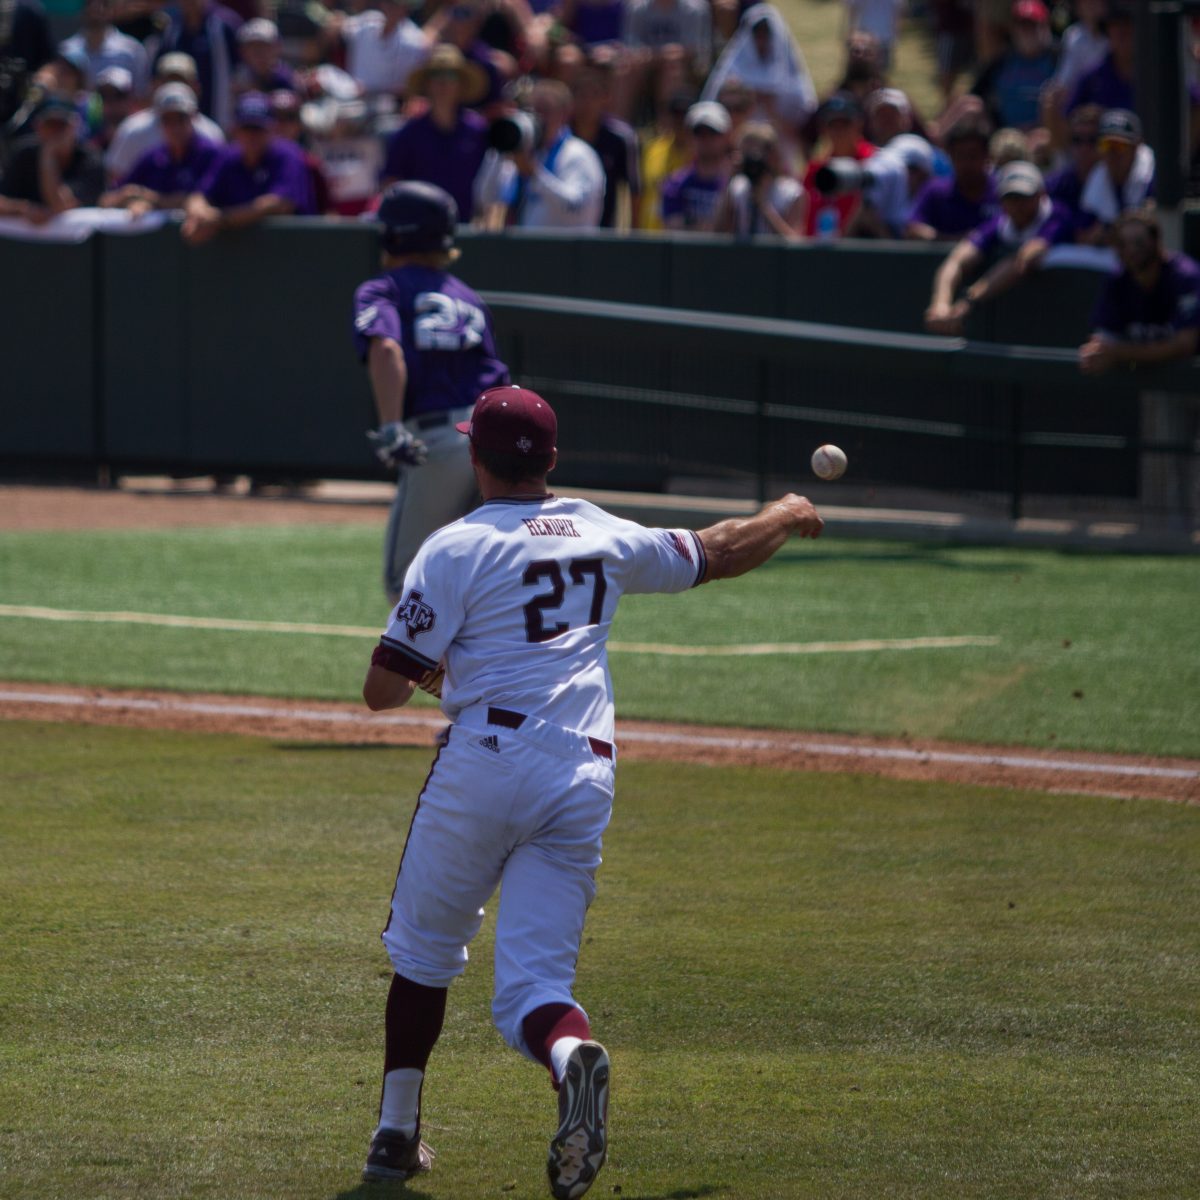 Ryan+Hendrix+throws+to+first+against+TCU+during+the+super+regionals+game+on+Sunday%2C+June+7th.%26%23160%3B